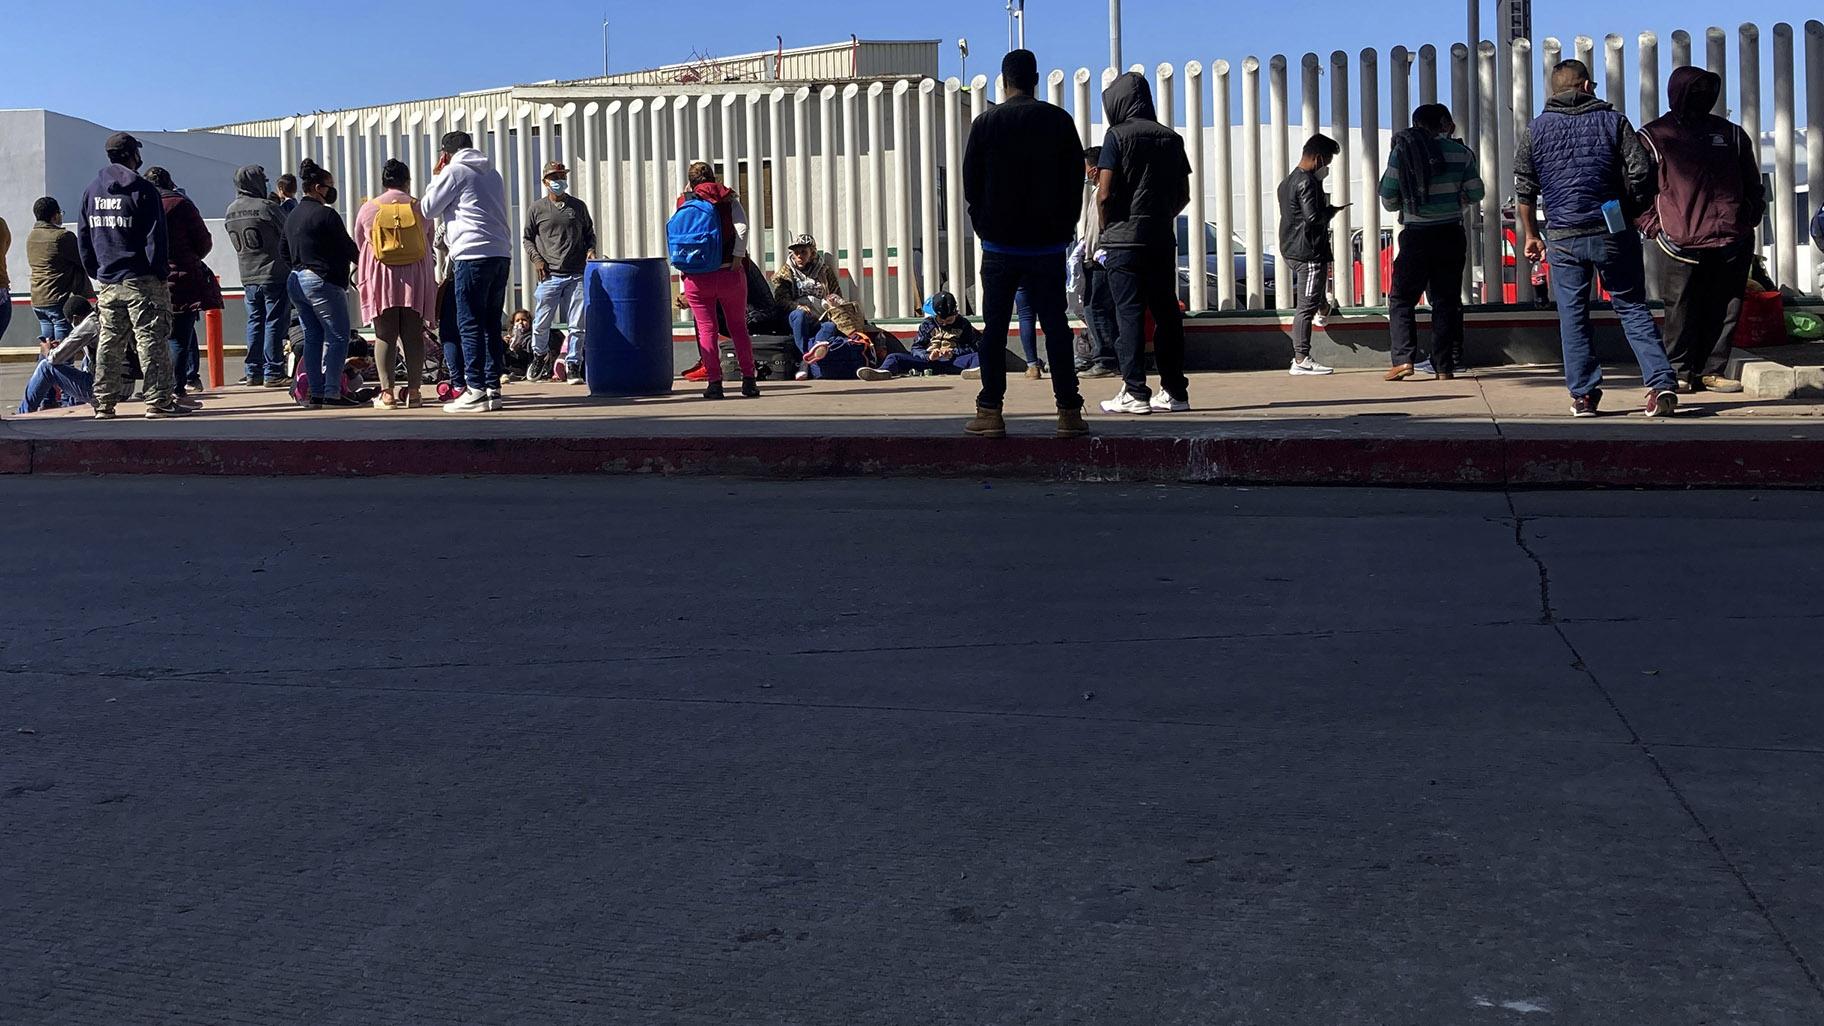 Migrants waiting to cross into the United States wait for news at the border crossing Wednesday, Feb. 17, 2021, in Tijuana, Mexico. (AP Photo / Elliot Spagat)